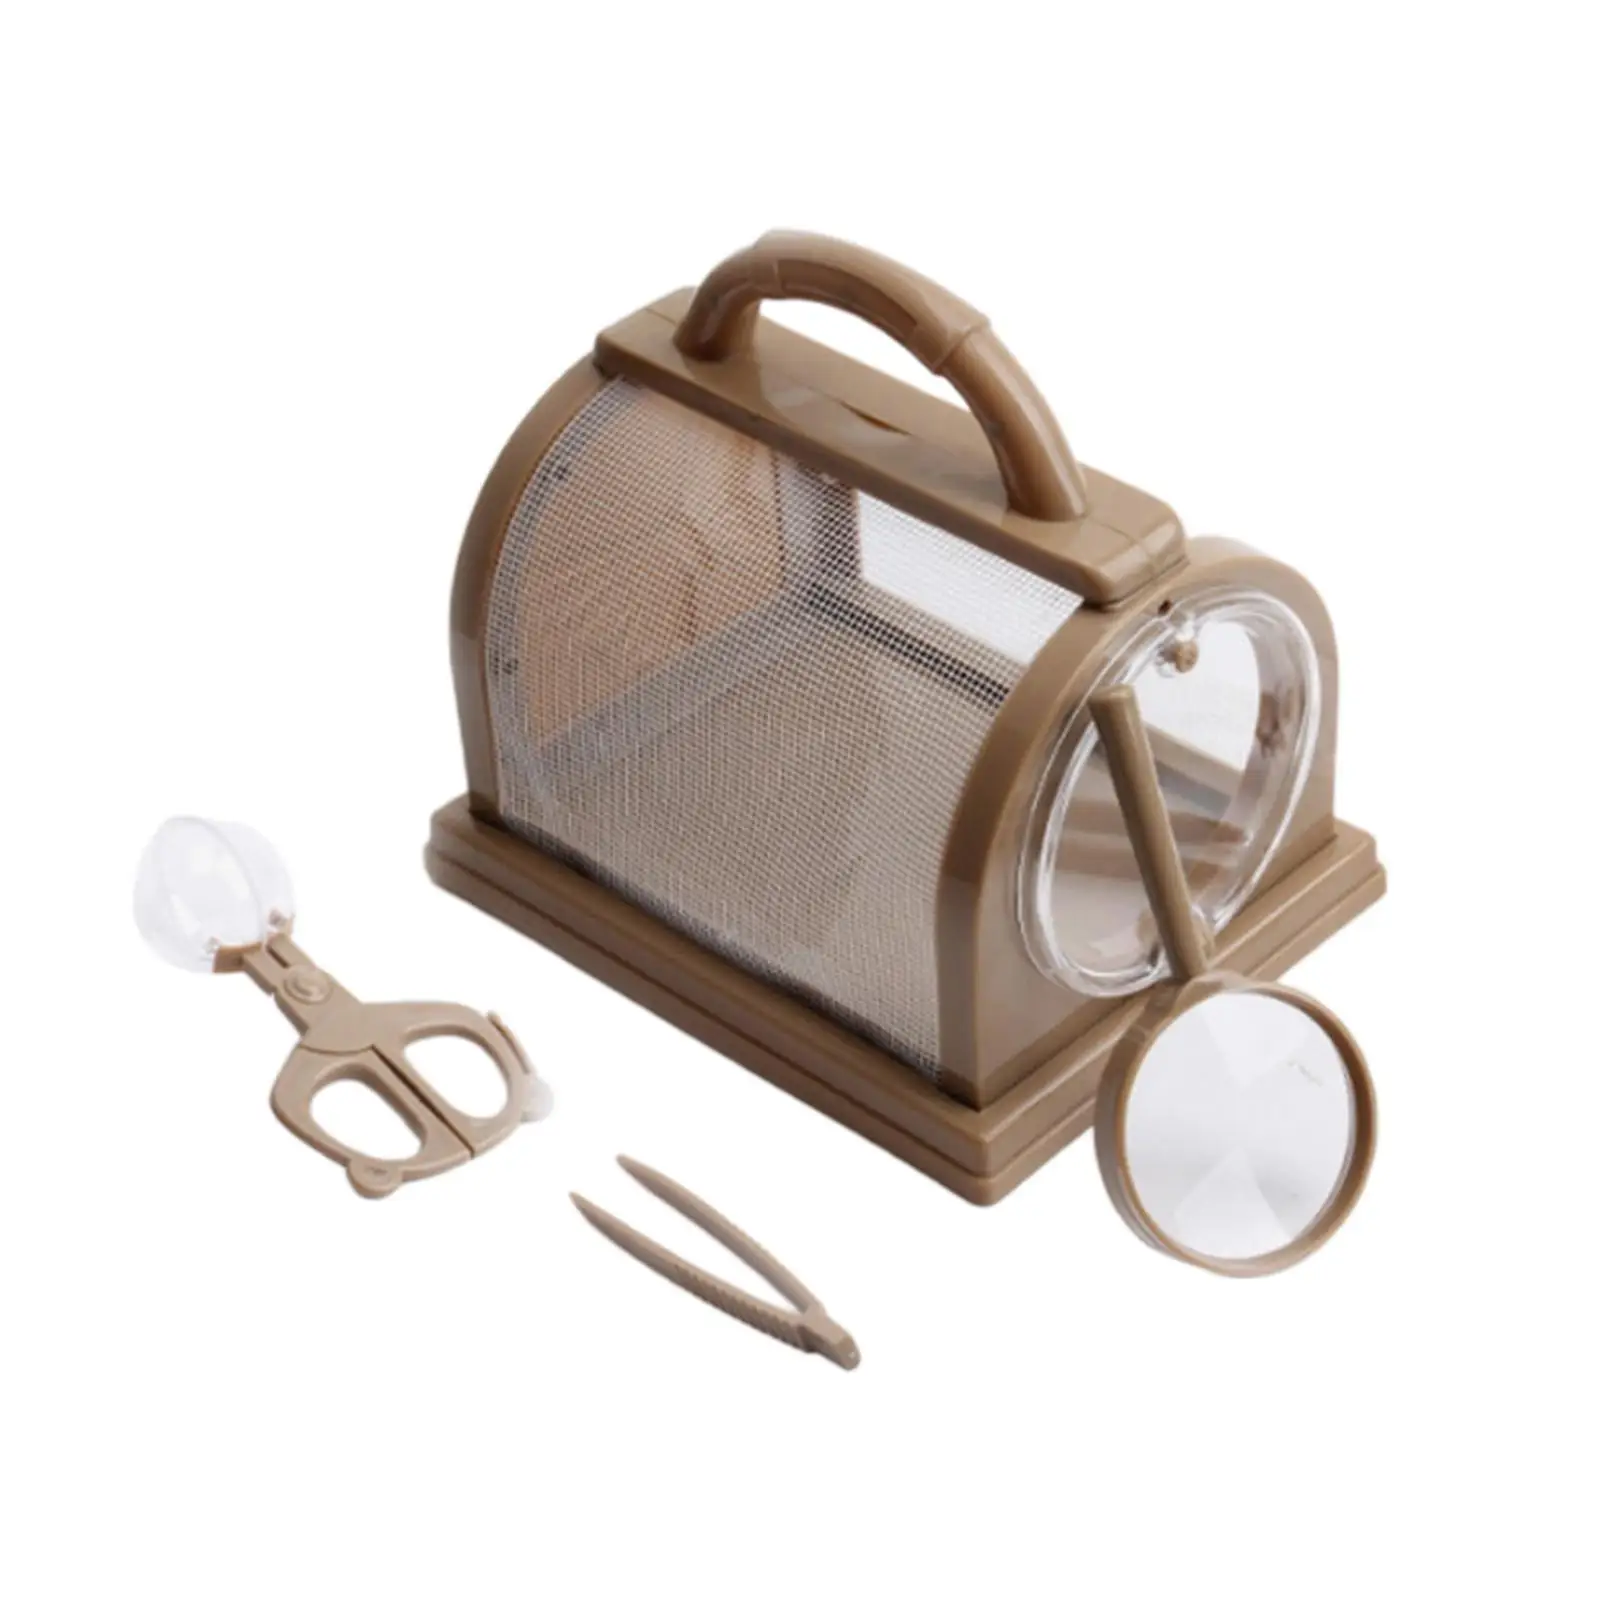 Insert Viewer Magnifying Outdoor Catcher Science Kits Catcher Box Observation Magnifying for Kids Birthday Gift